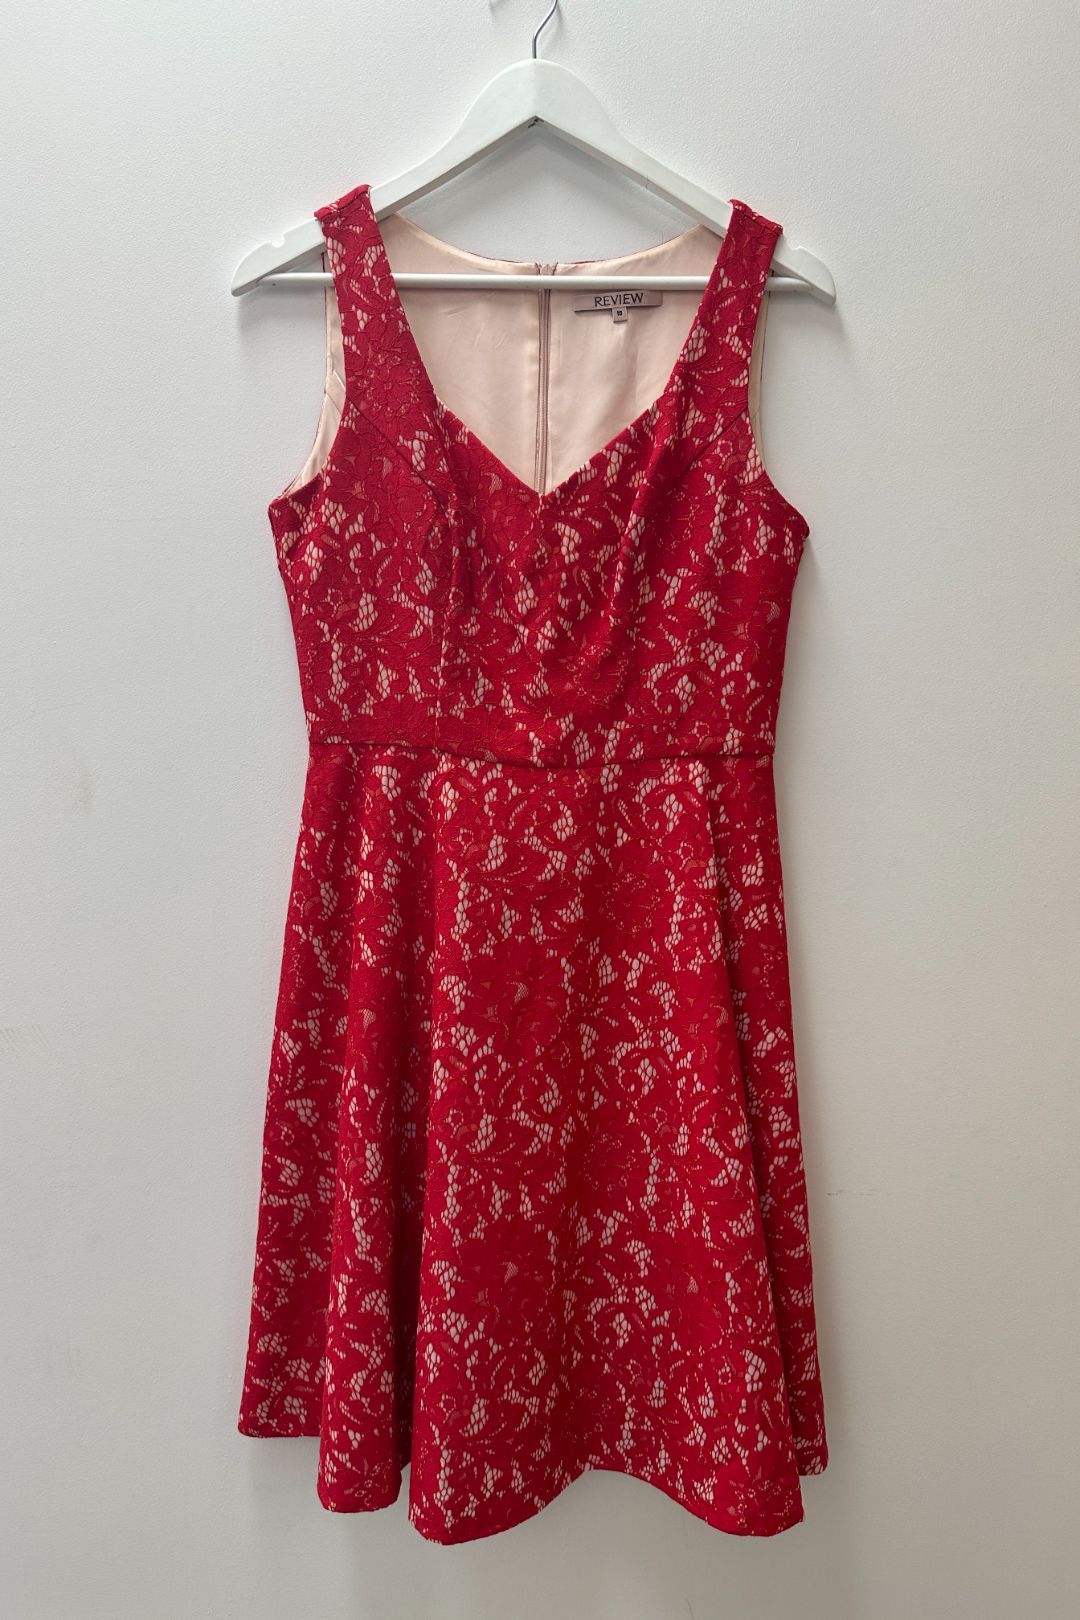 Review High Tea Floral Lace Dress in Red